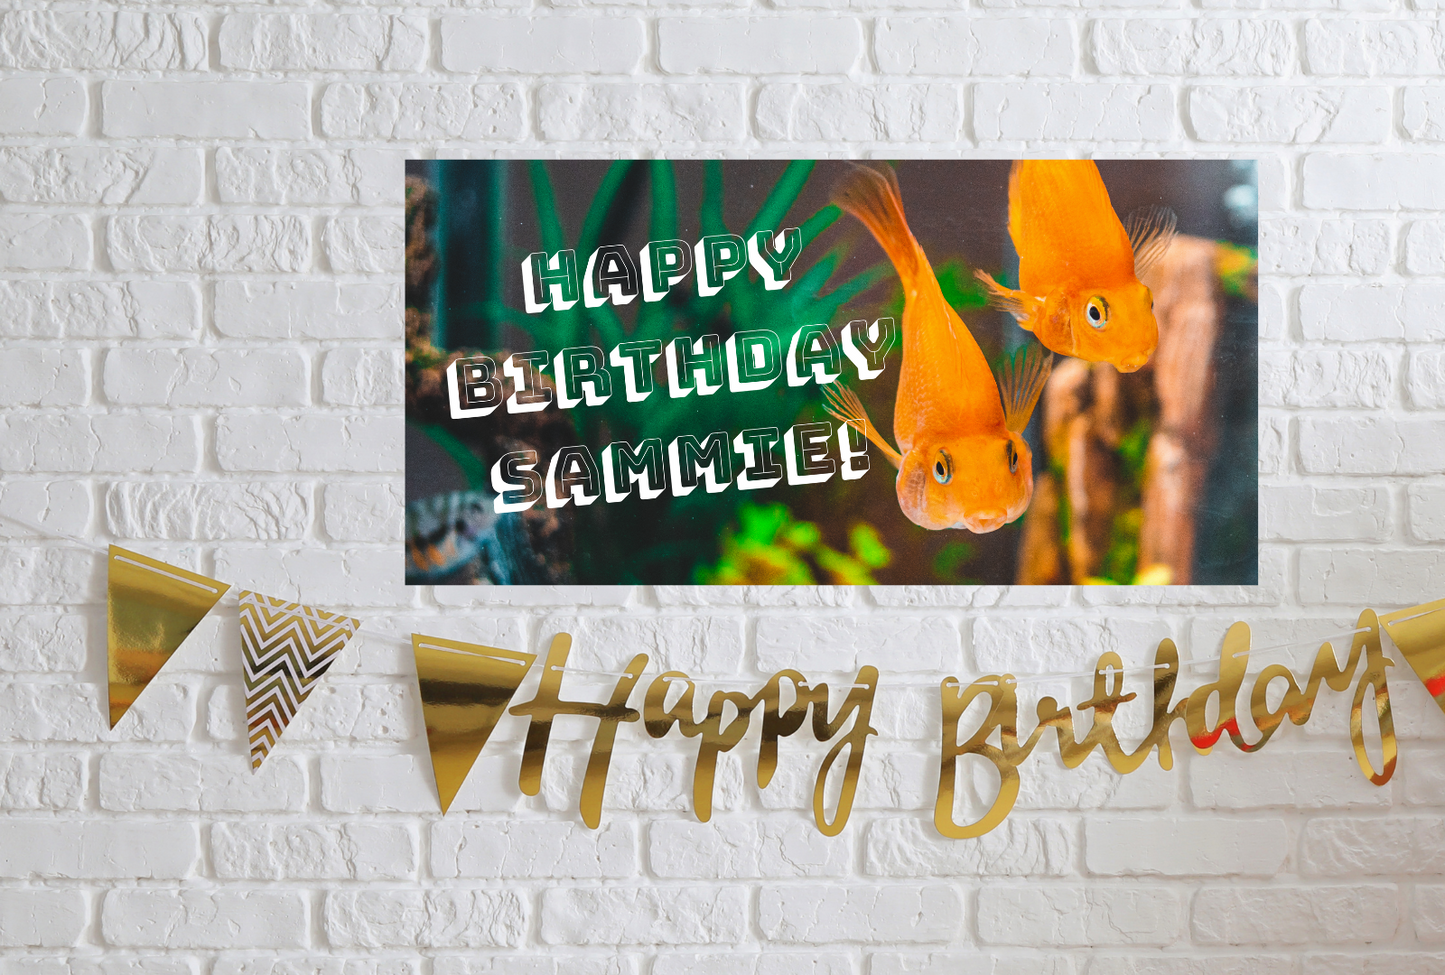 Customizable Goldfish Banners  These waterproof, reusable goldfish banners are the perfect way to add a splash of color to your birthday party! They're easy to install and come in a variety of colors.  Just add your text, and you're done!  Whether you want a banner that matches your party's theme or just something cute to hang up during the celebration, these customizable goldfish banners are sure to bring smiles all around.